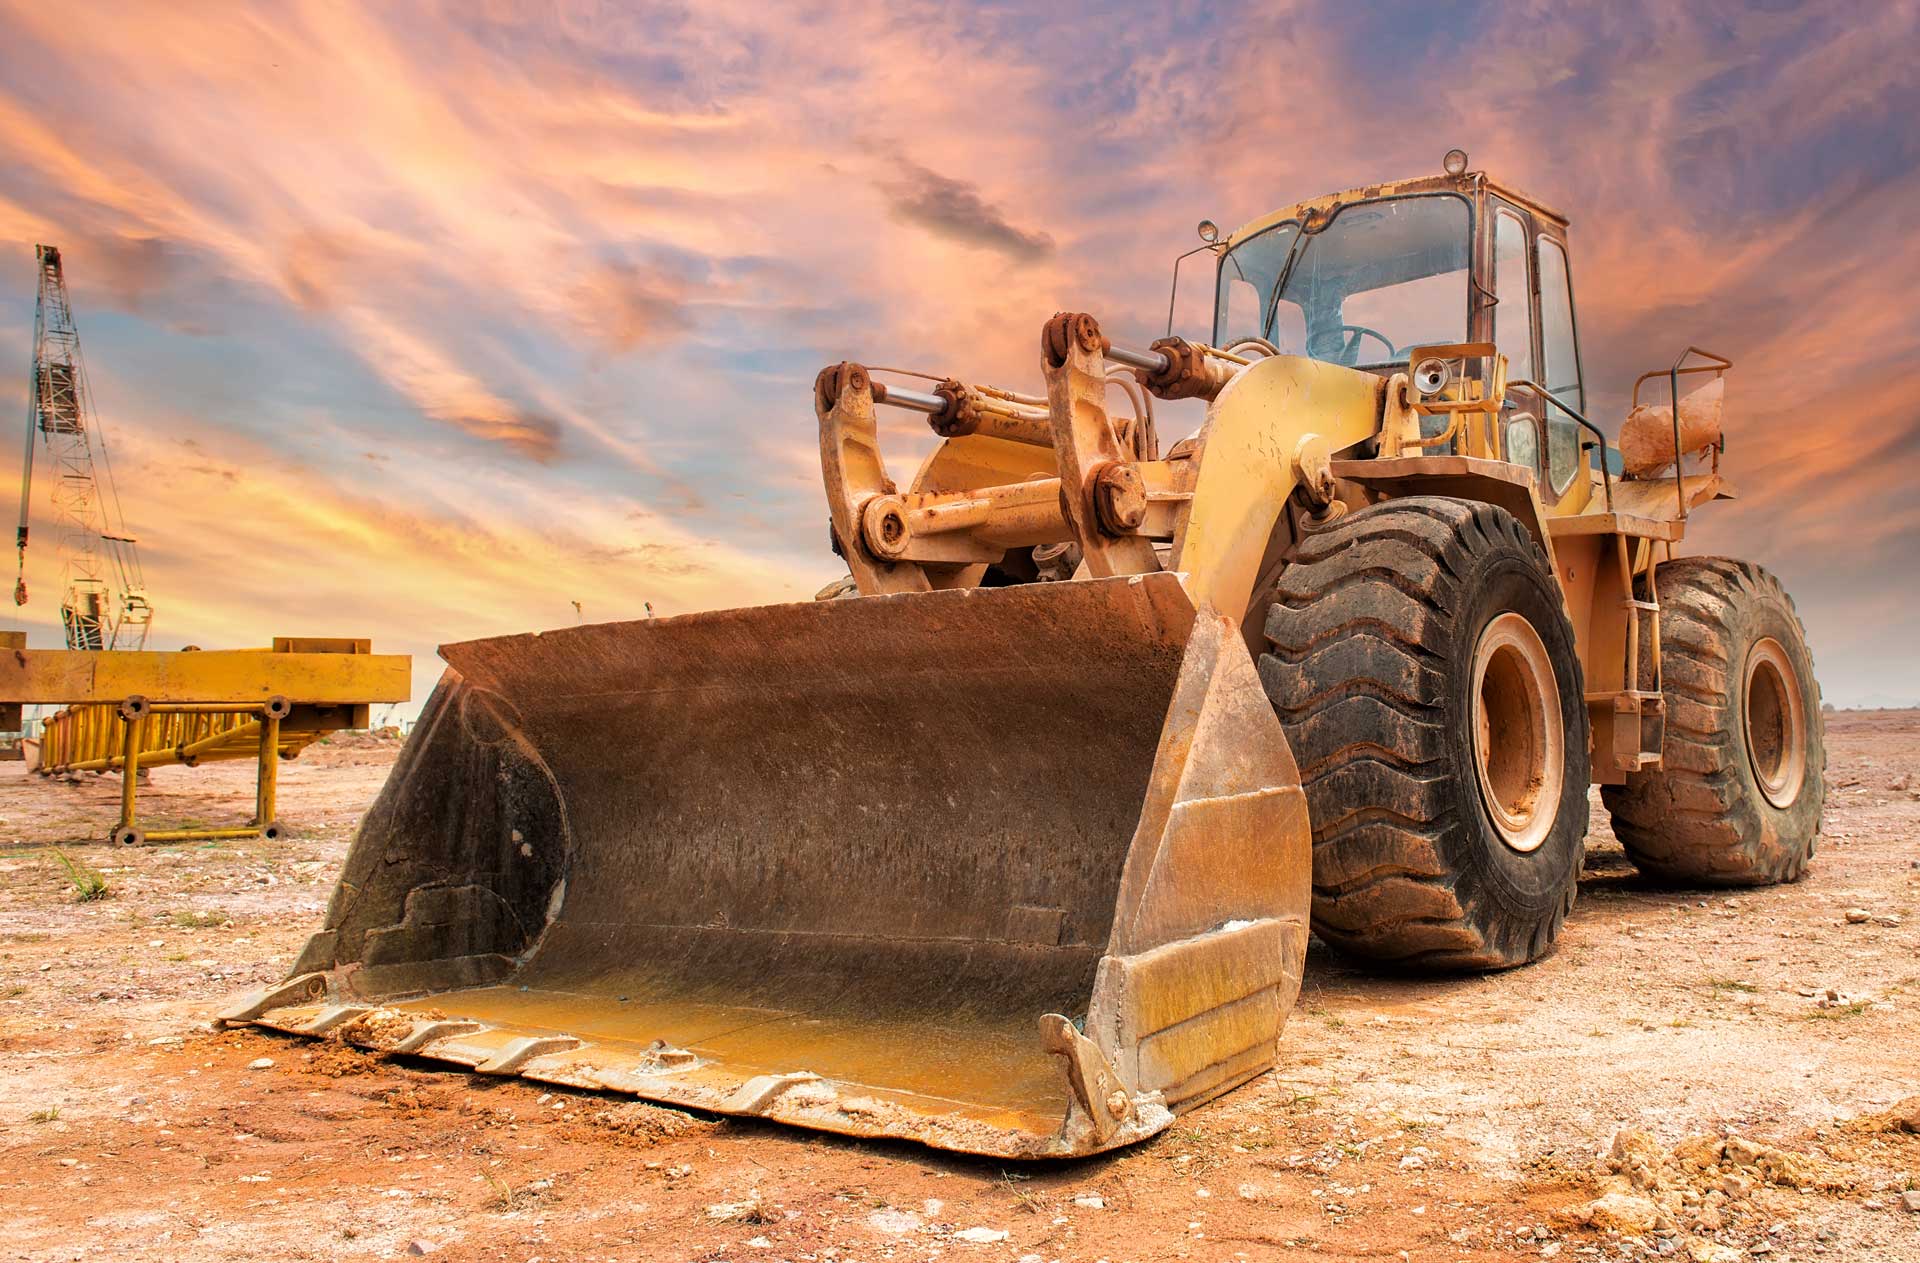 Bulldozer on construction site that is dust-free, due to heavy equipment dust collection solutions